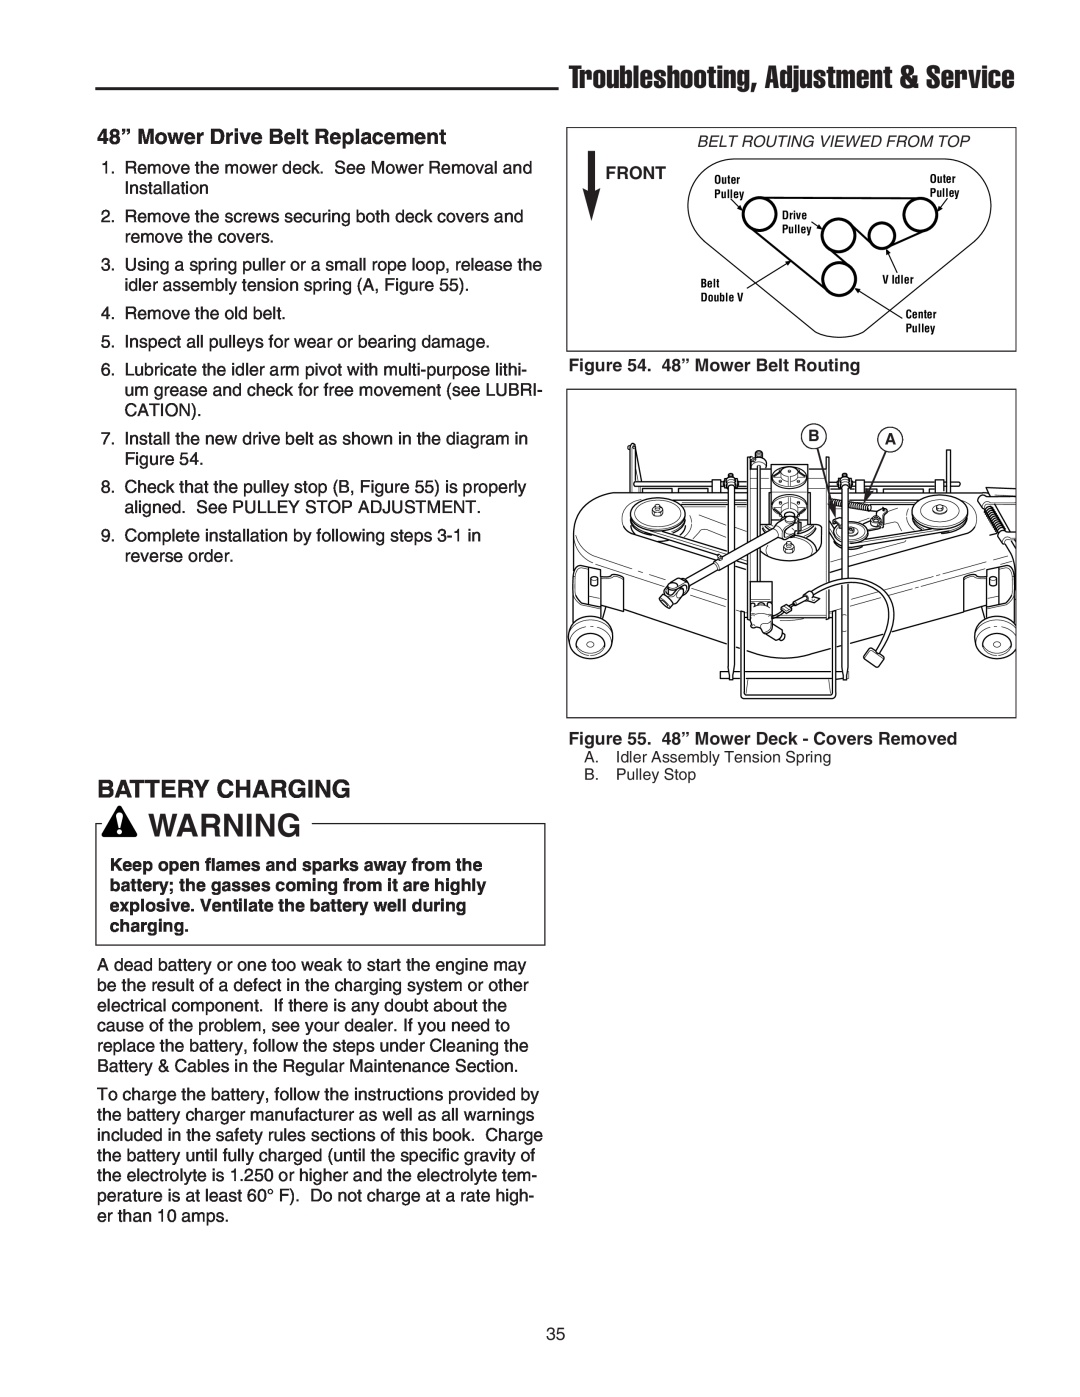 Simplicity 1693136 Battery Charging, 48” Mower Drive Belt Replacement, Troubleshooting, Adjustment & Service, Front 